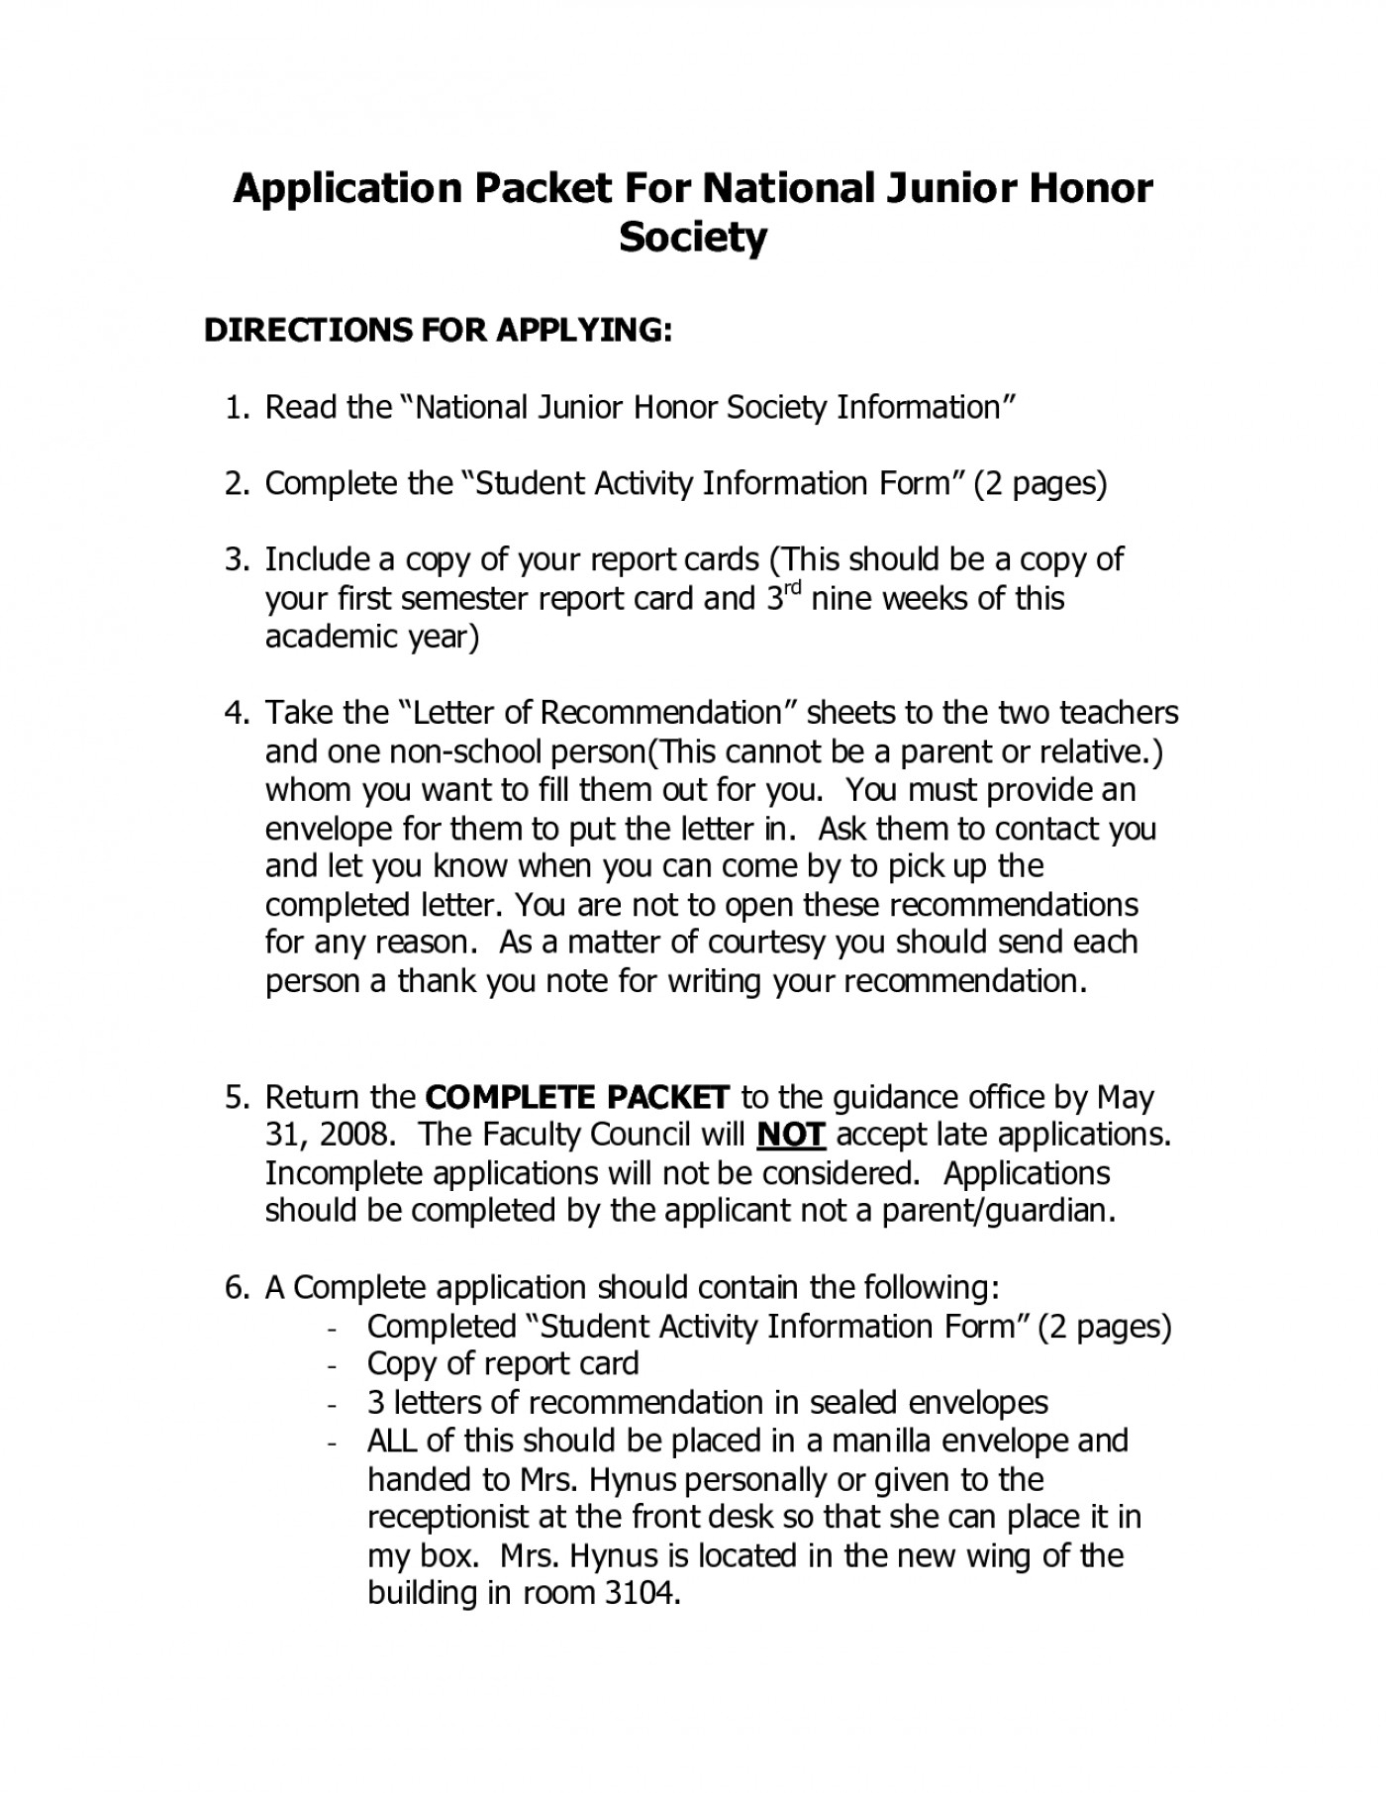 006 Essay Example National Honor Society Letter Of Recommendation For Within National Junior Honor Society Letter Of Recommendation Template